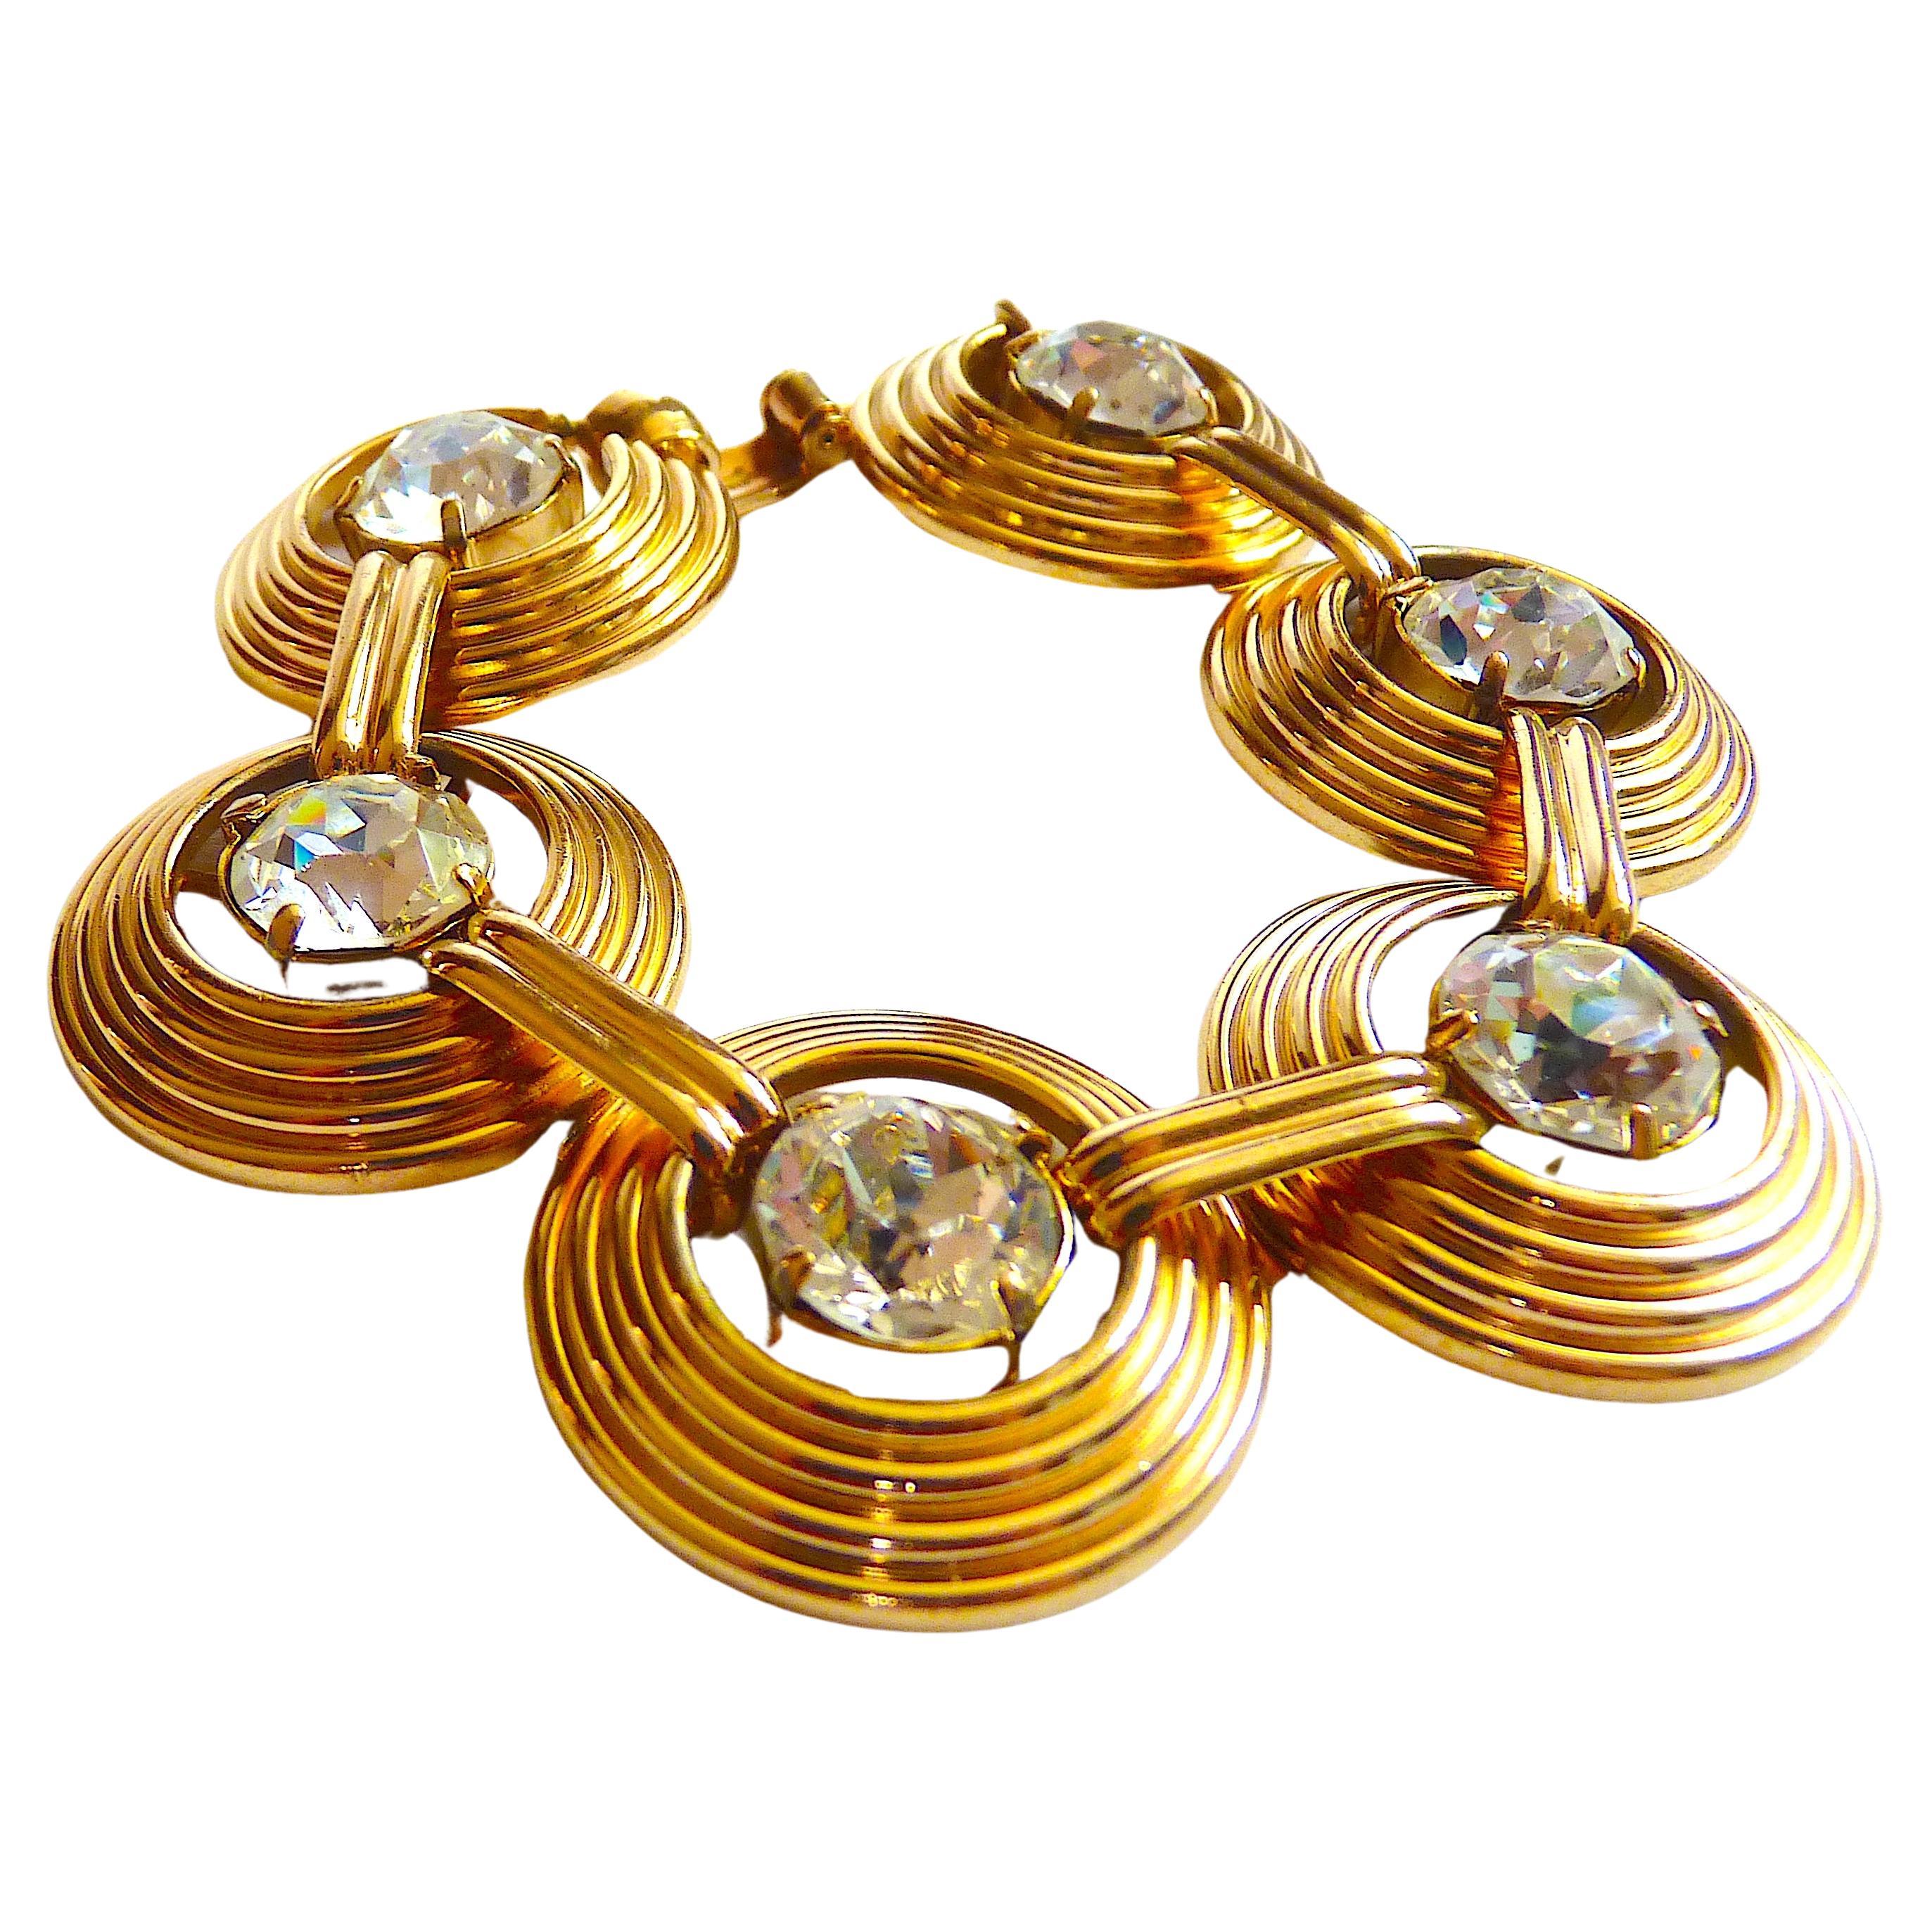 Dior Clear Crystal Cabochons and Gilt Metal Bracelet, Vintage from the 1970s For Sale